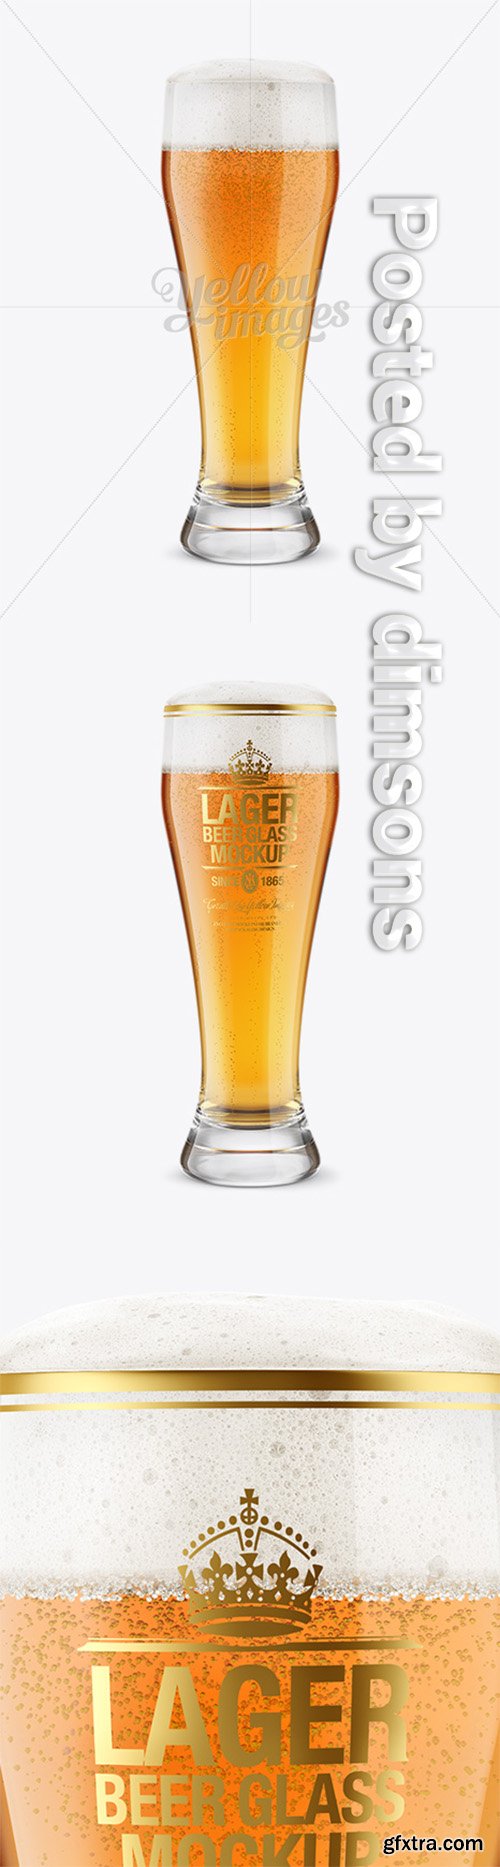 Weizen Glass with Lager Beer Mockup 14707